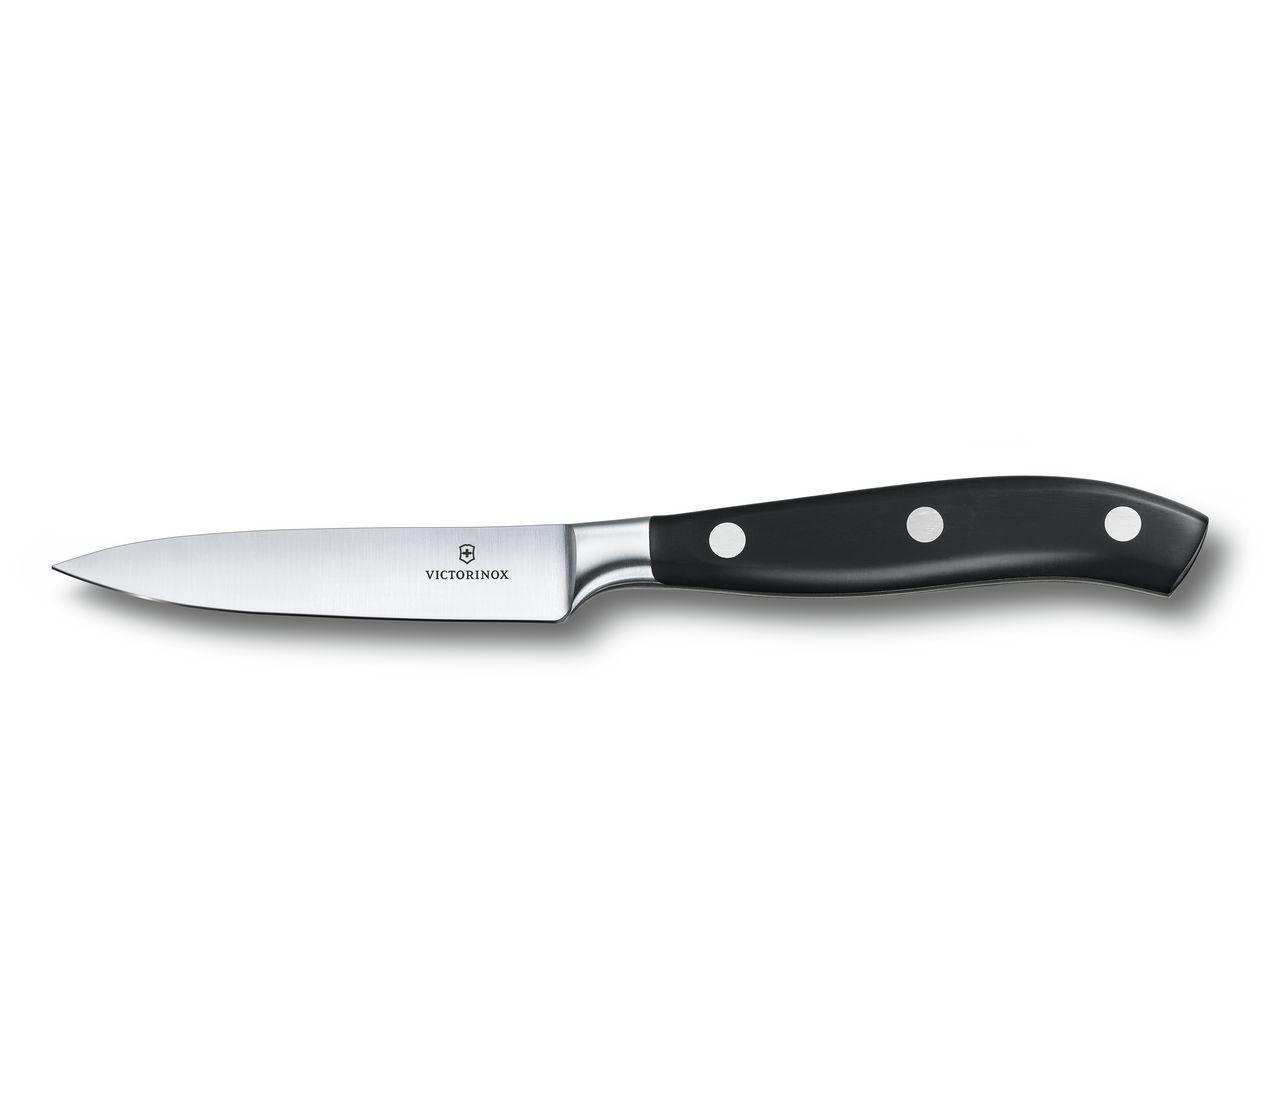 Grand Maître Forged Paring Knife-7.7203.10G